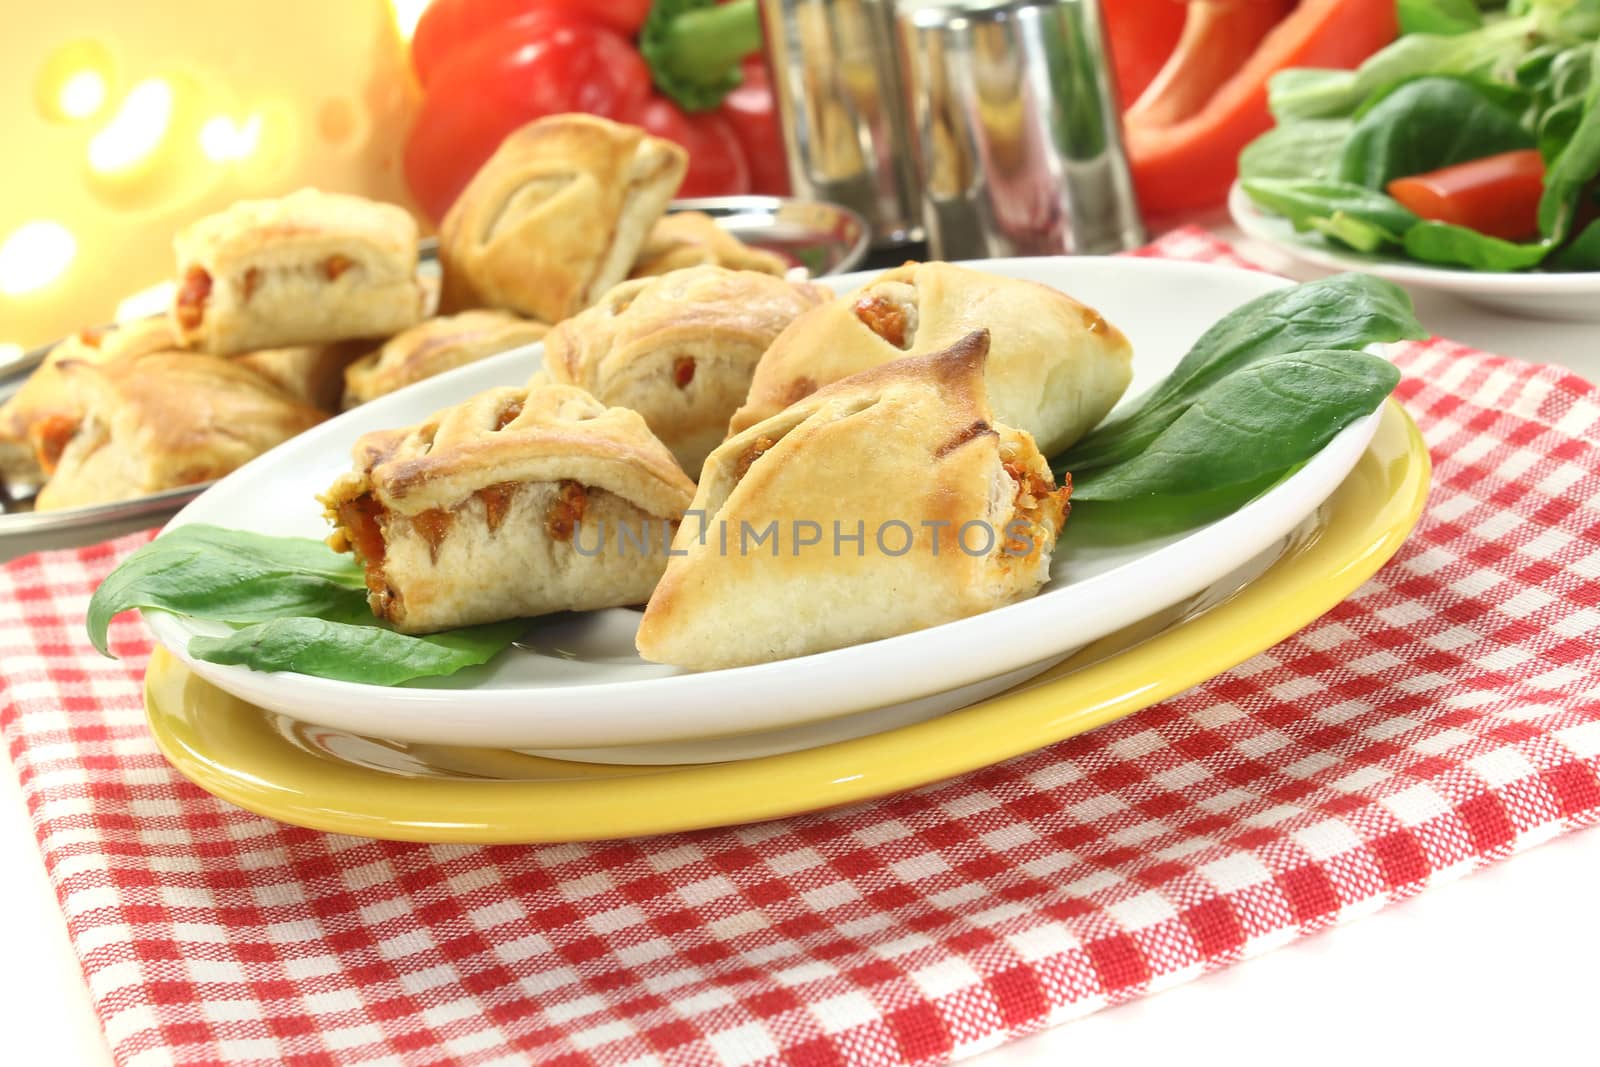 Puff pastry with bell peppers, cheese filling and salad on a light background